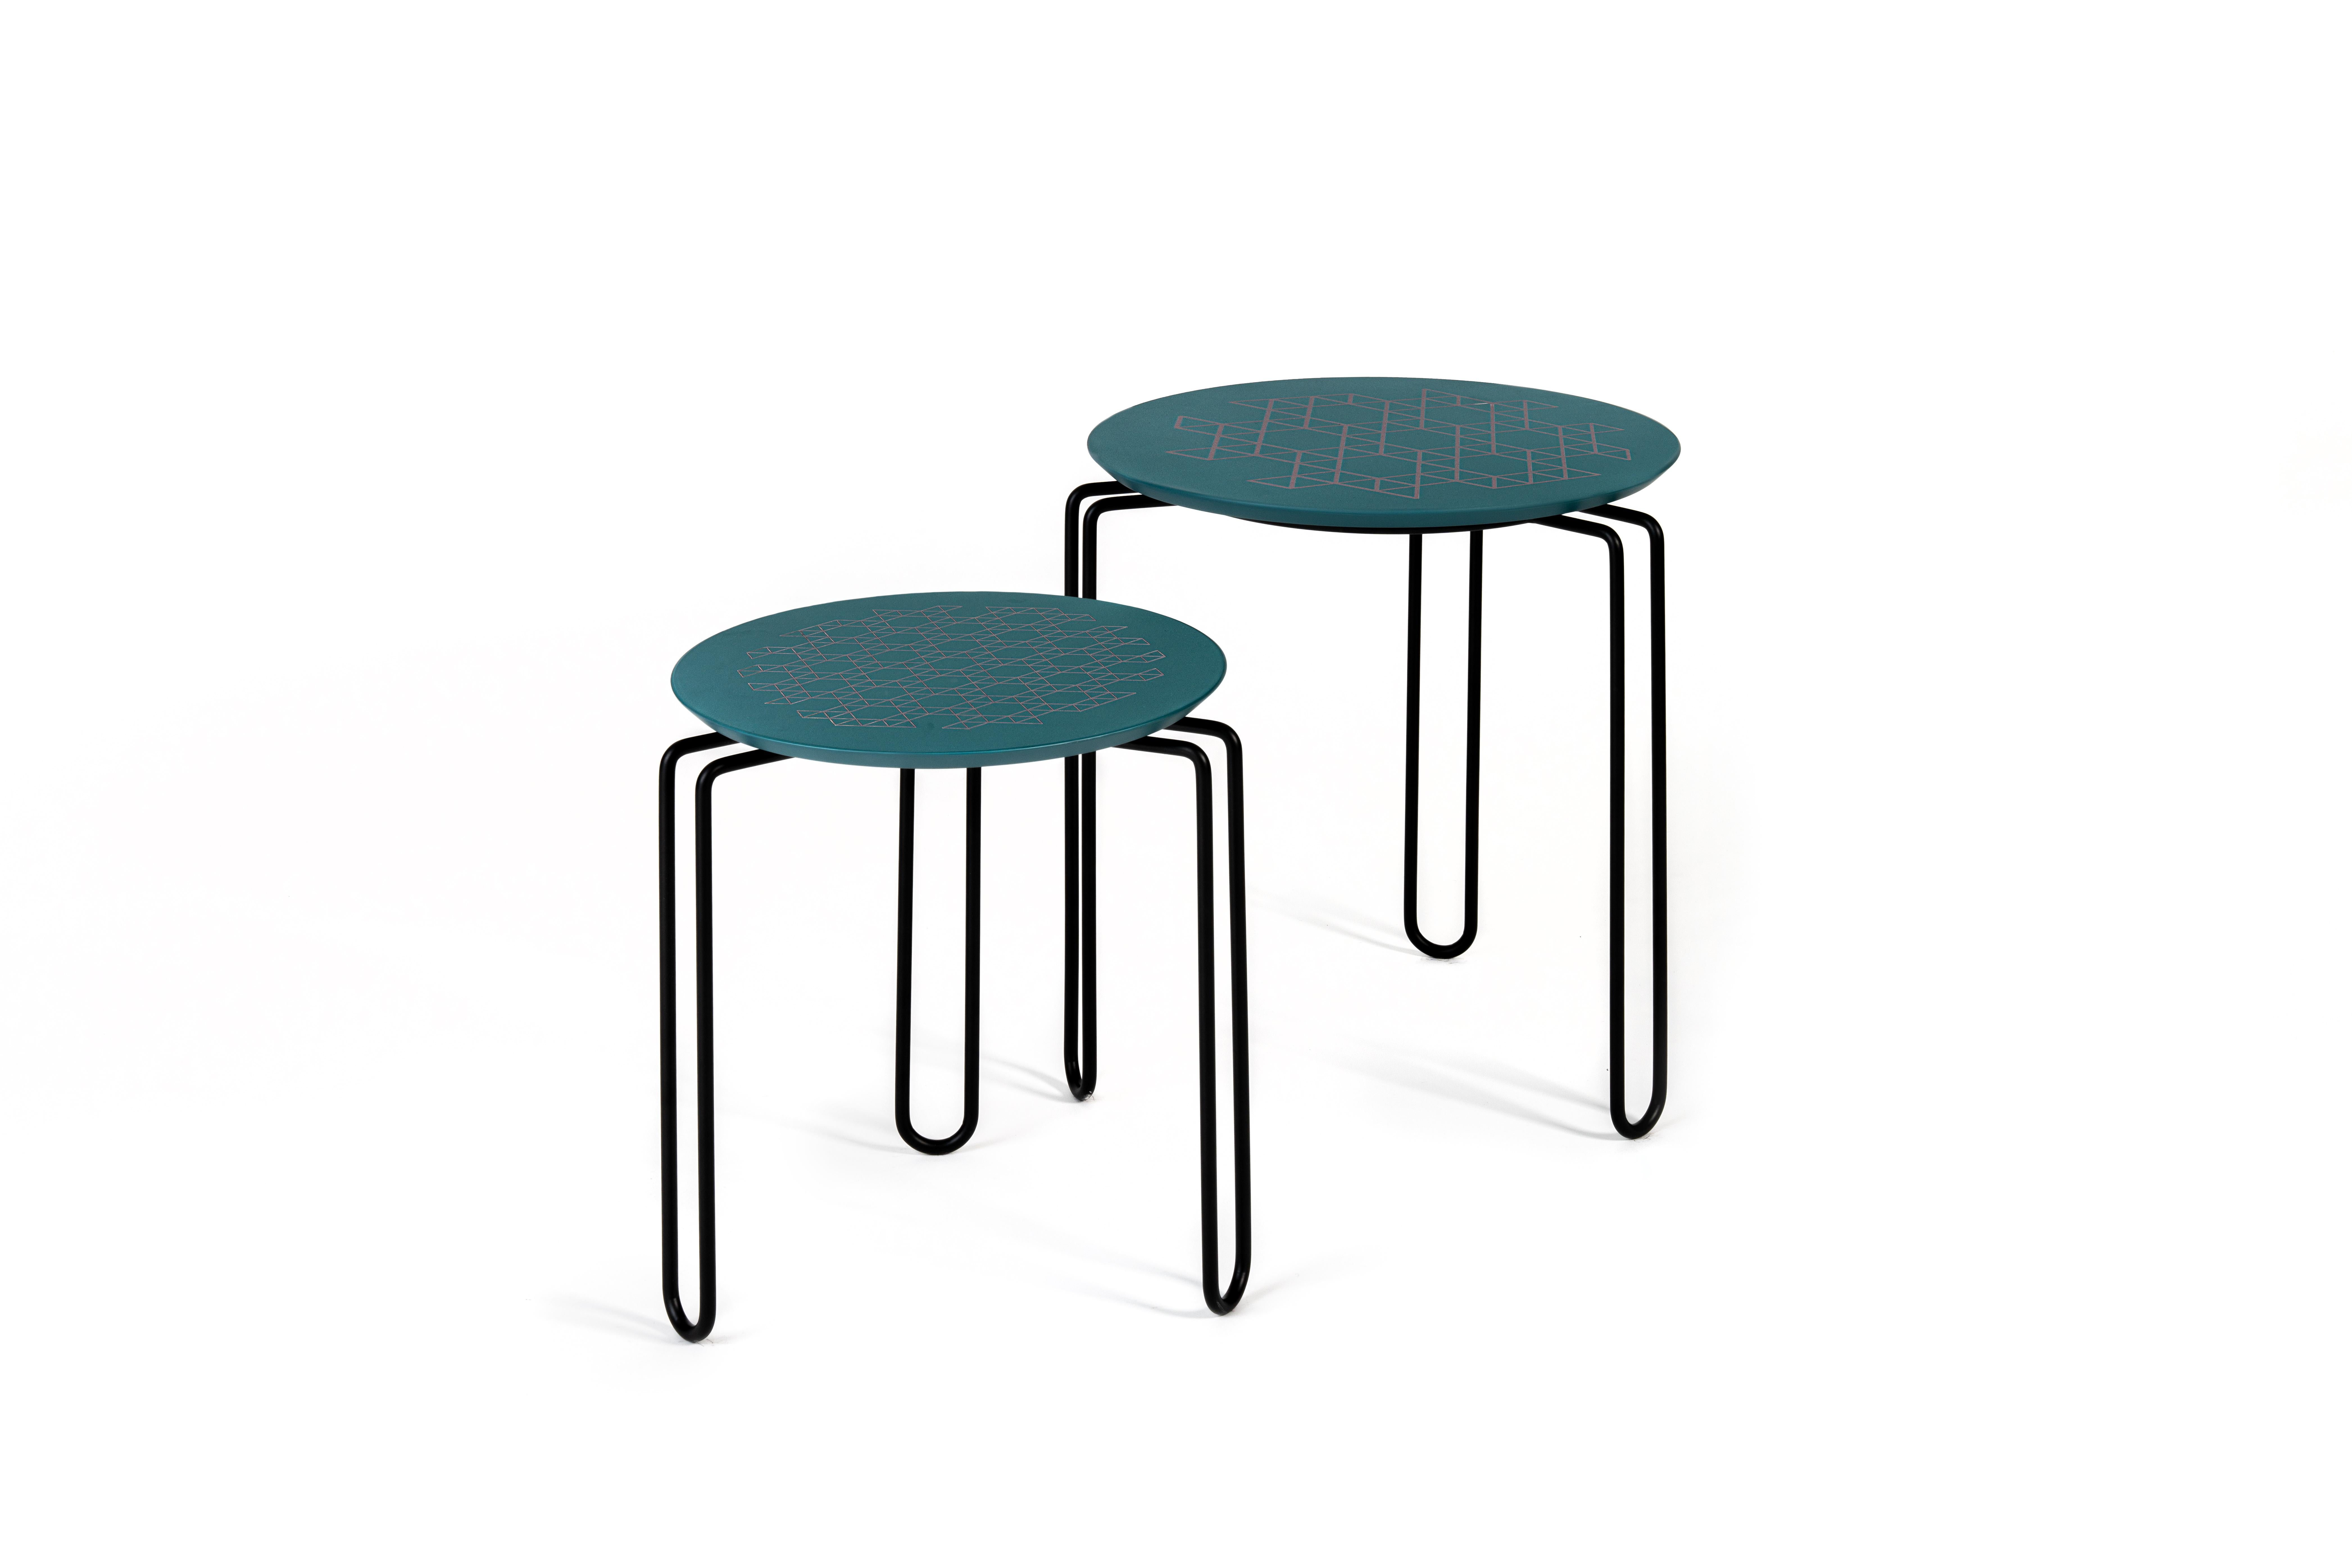 Set of 2 caleido coffee table by Mentemano
Dimensions: 
42 x H 47 cm
35 x H 41 cm
Materials: Steel, wood 


A bended steel structure of curves with three double legs. The circular stand top is made of lacquered wood and enriched with digital